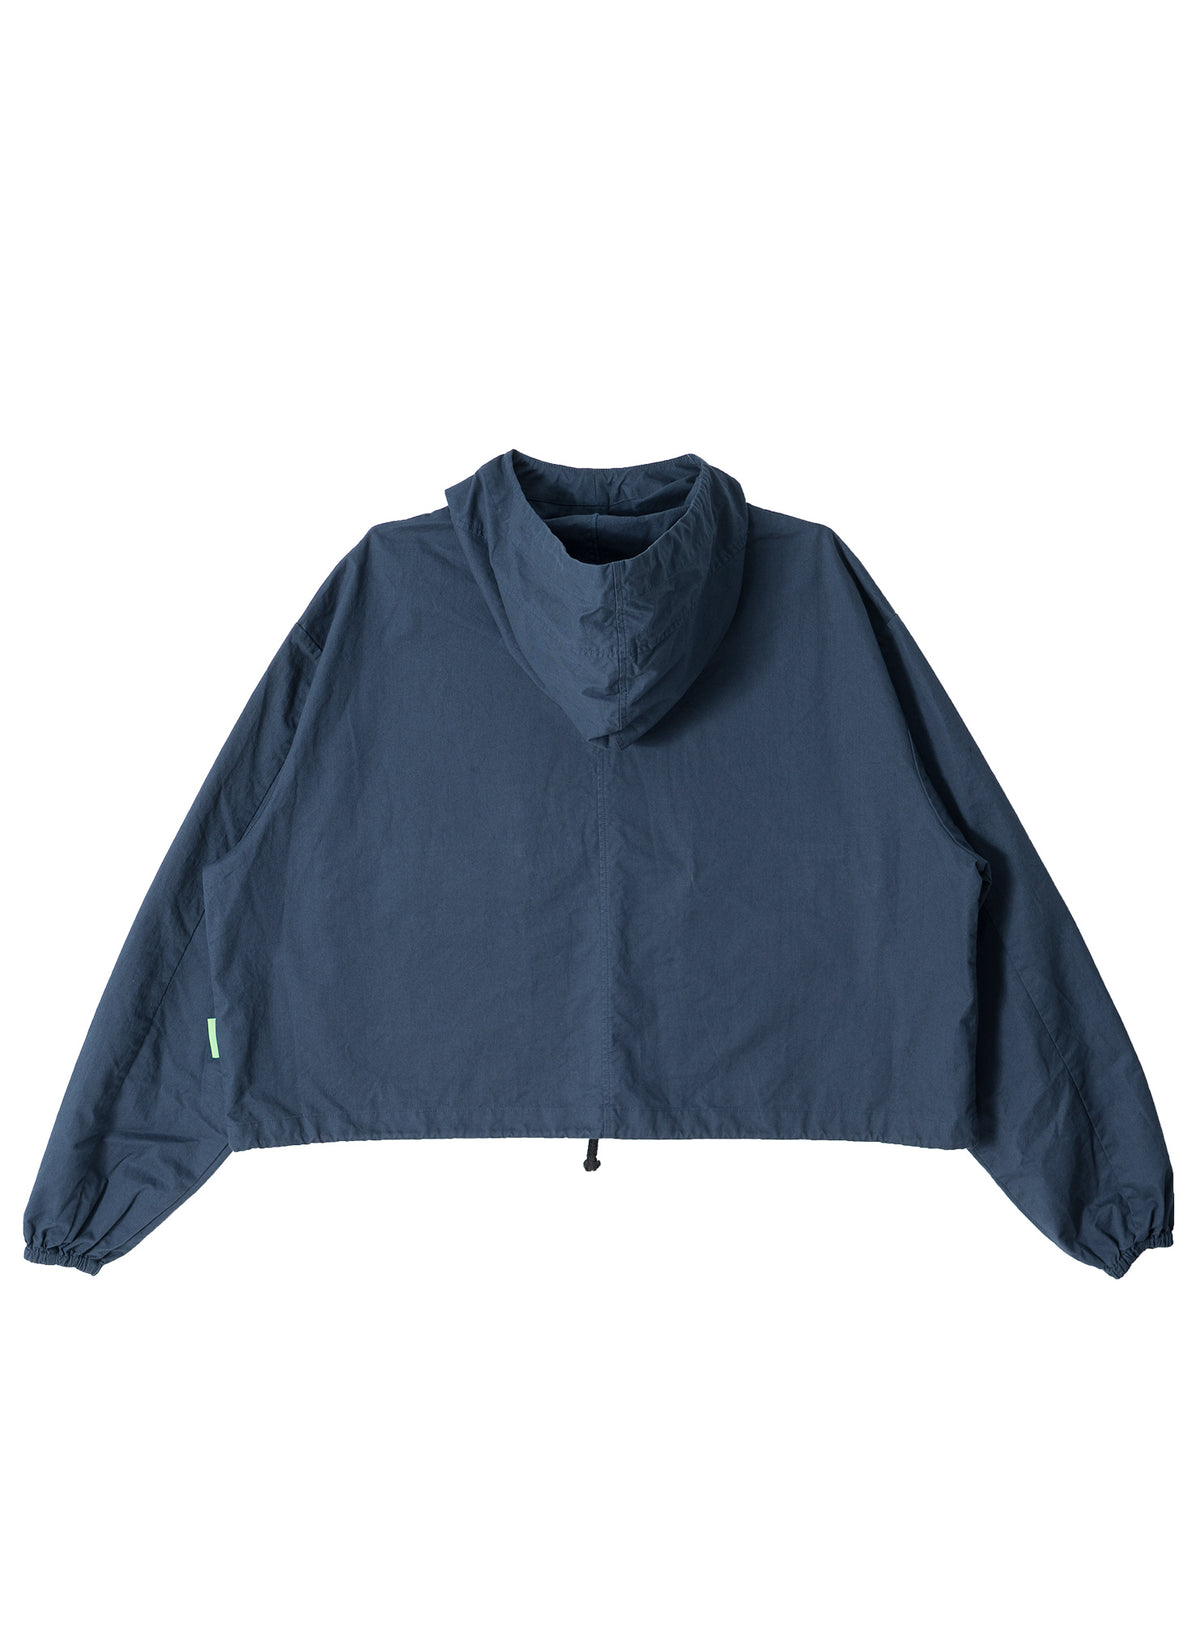 WILLY CHAVARRIA / HOODIE PARKA NAVY BASE